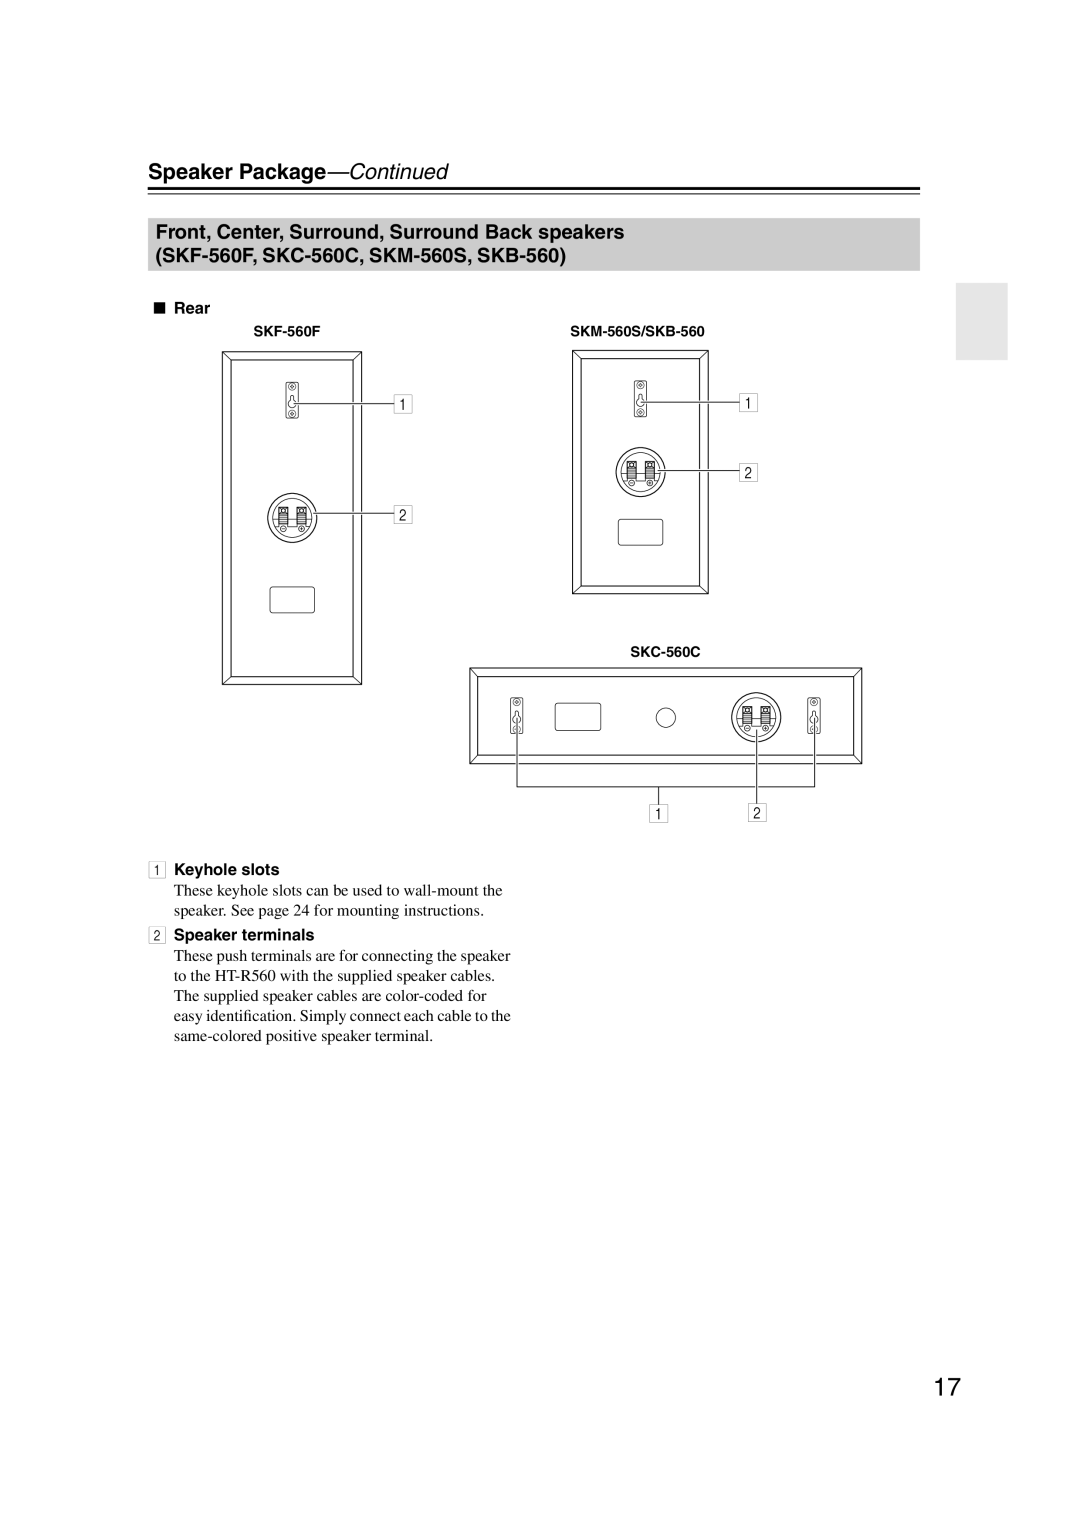 Onkyo HT-S5100 instruction manual Speaker Package—Continued, Rear, 1Keyhole slots, 2Speaker terminals 